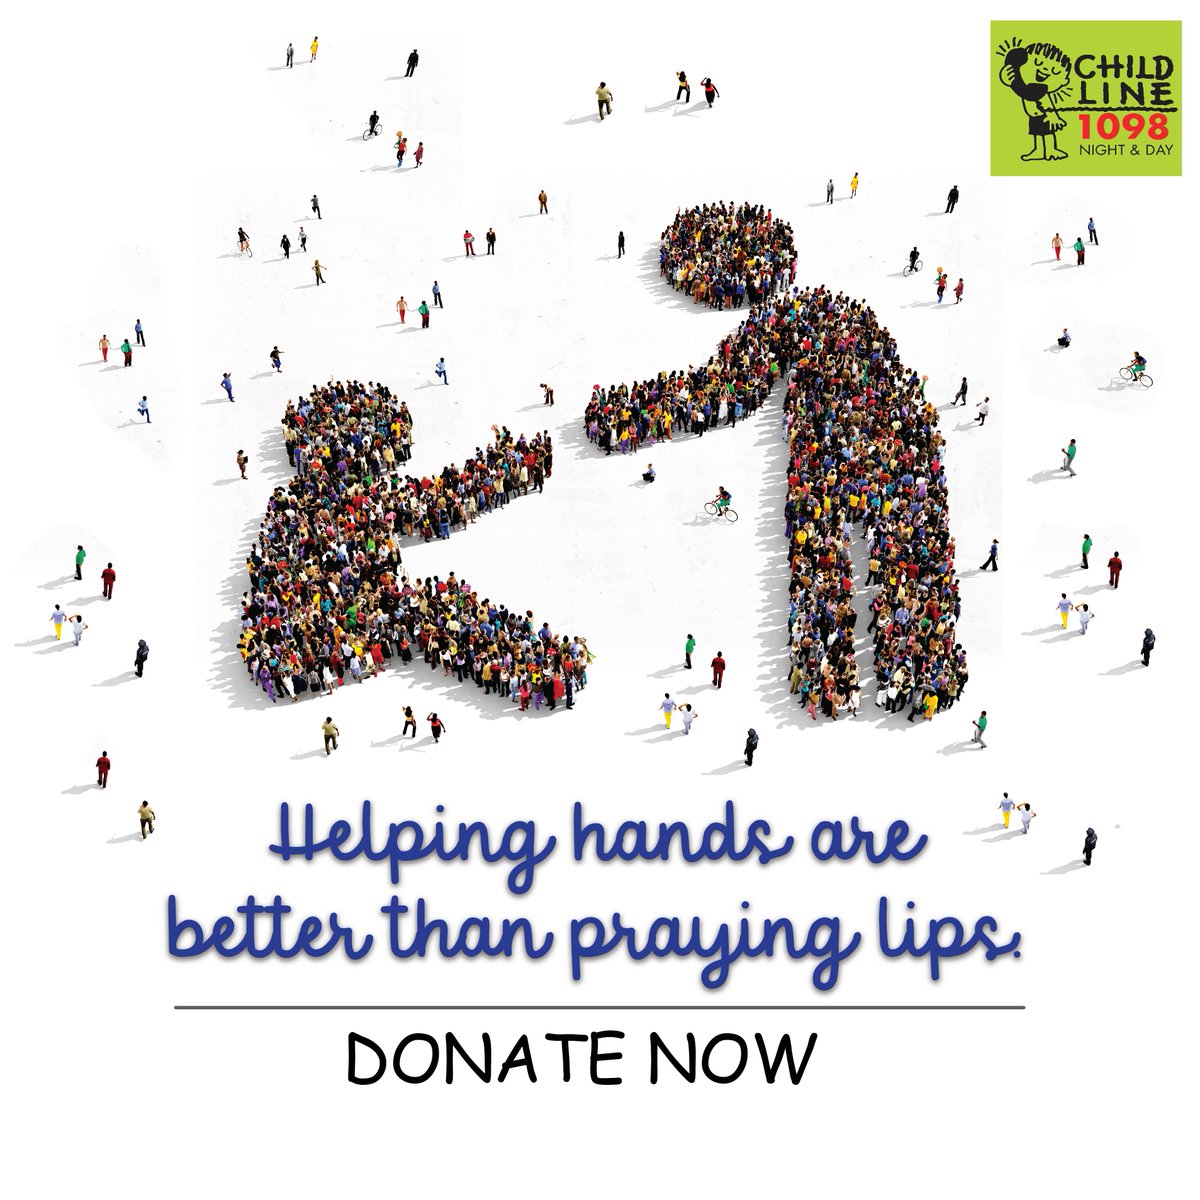 Lend a helping hand to provide a safe childhood Donate now: childlineindia.org/a/donate #Childline1098 #ChildrenInNeed #ChildWelfare #ChildCare #ChildSupport #ChildrenRights #Children #ChildRescue #DonateNow